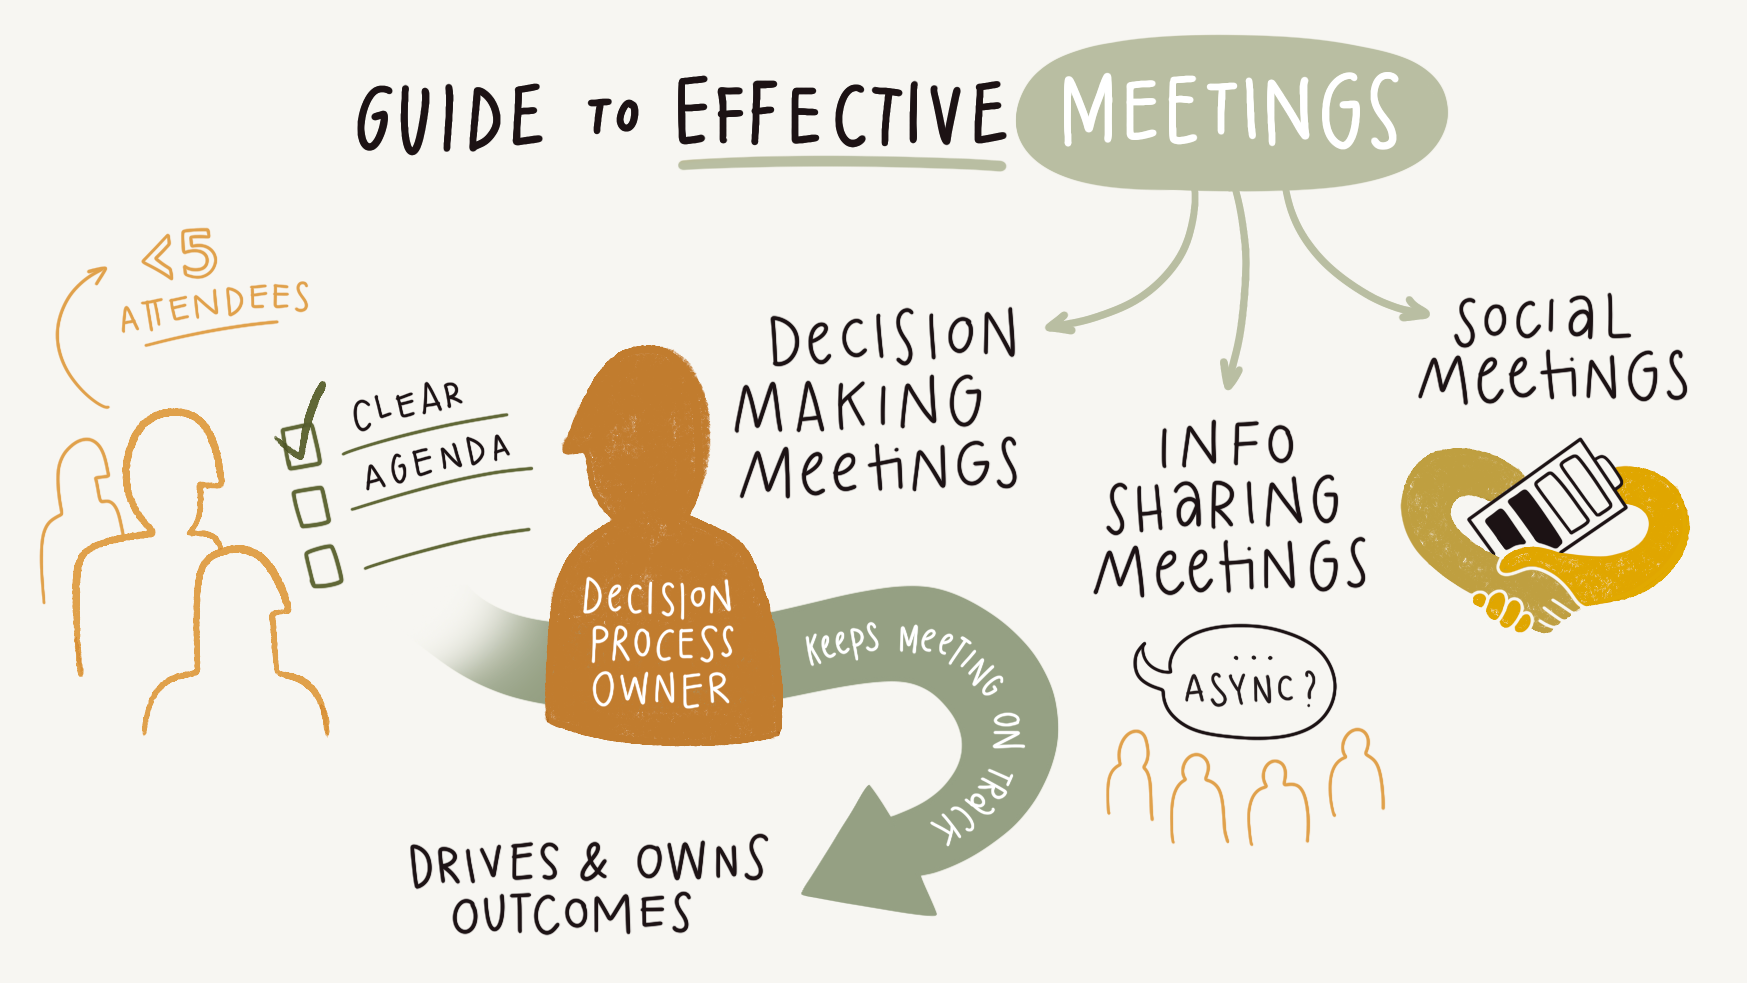 Guide to effective meetings